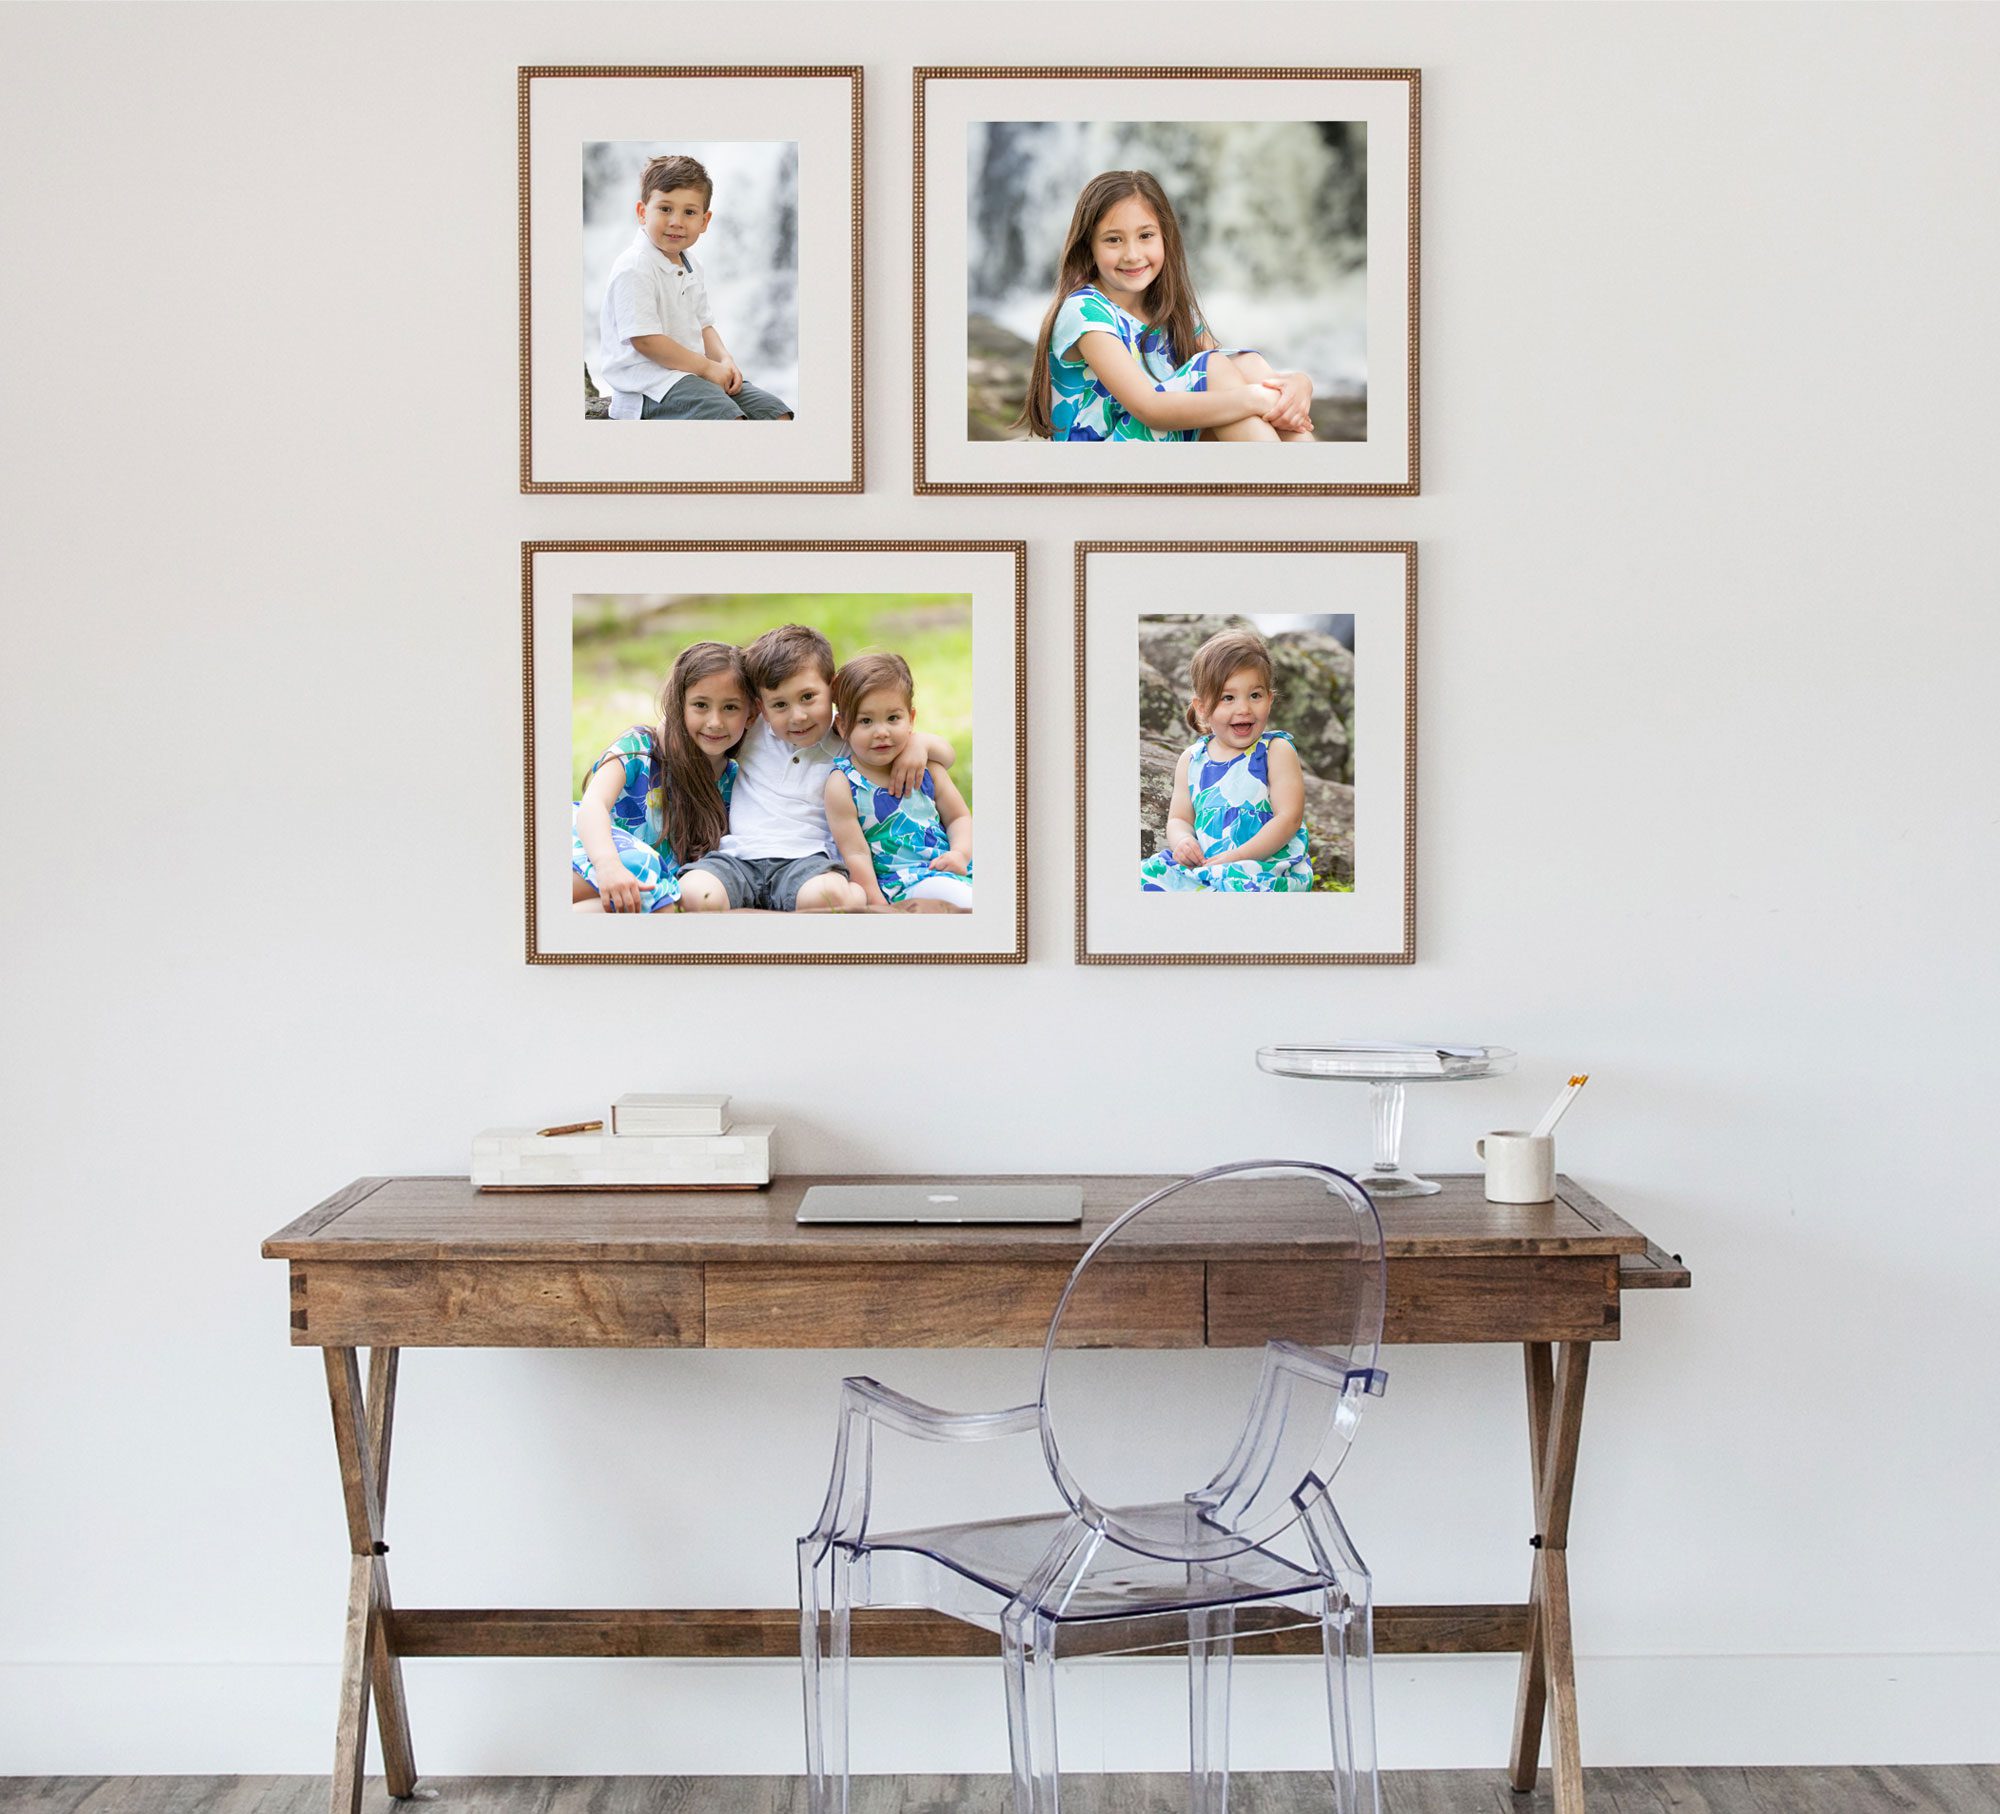 printed photos in frames